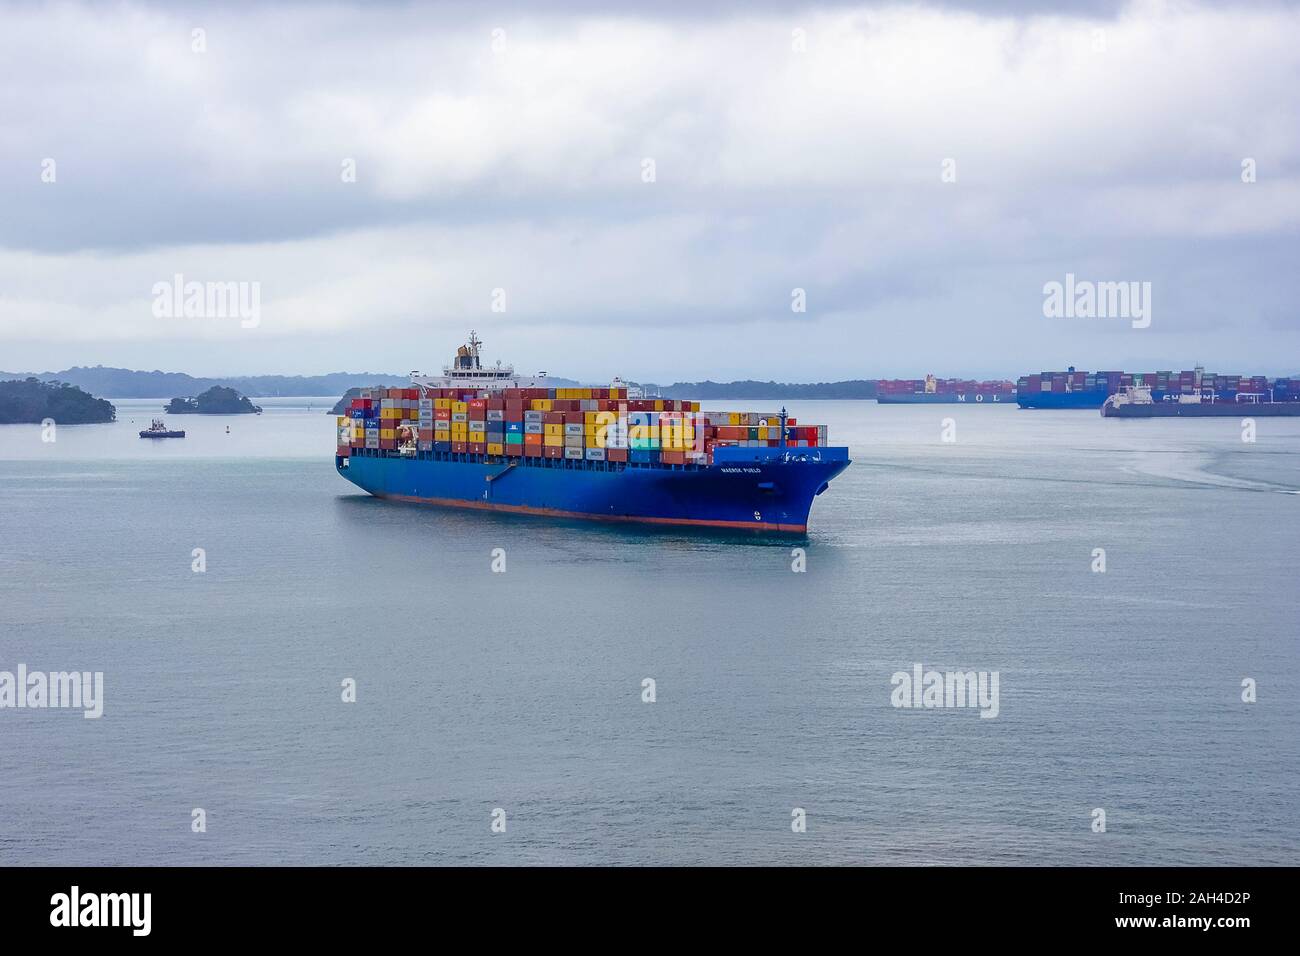 Panama Canal, Panama - December 7, 2019: Maersk Line container cargo ship at Gatun Lake near Panama Canal. It is the world's largest container shippin Stock Photo